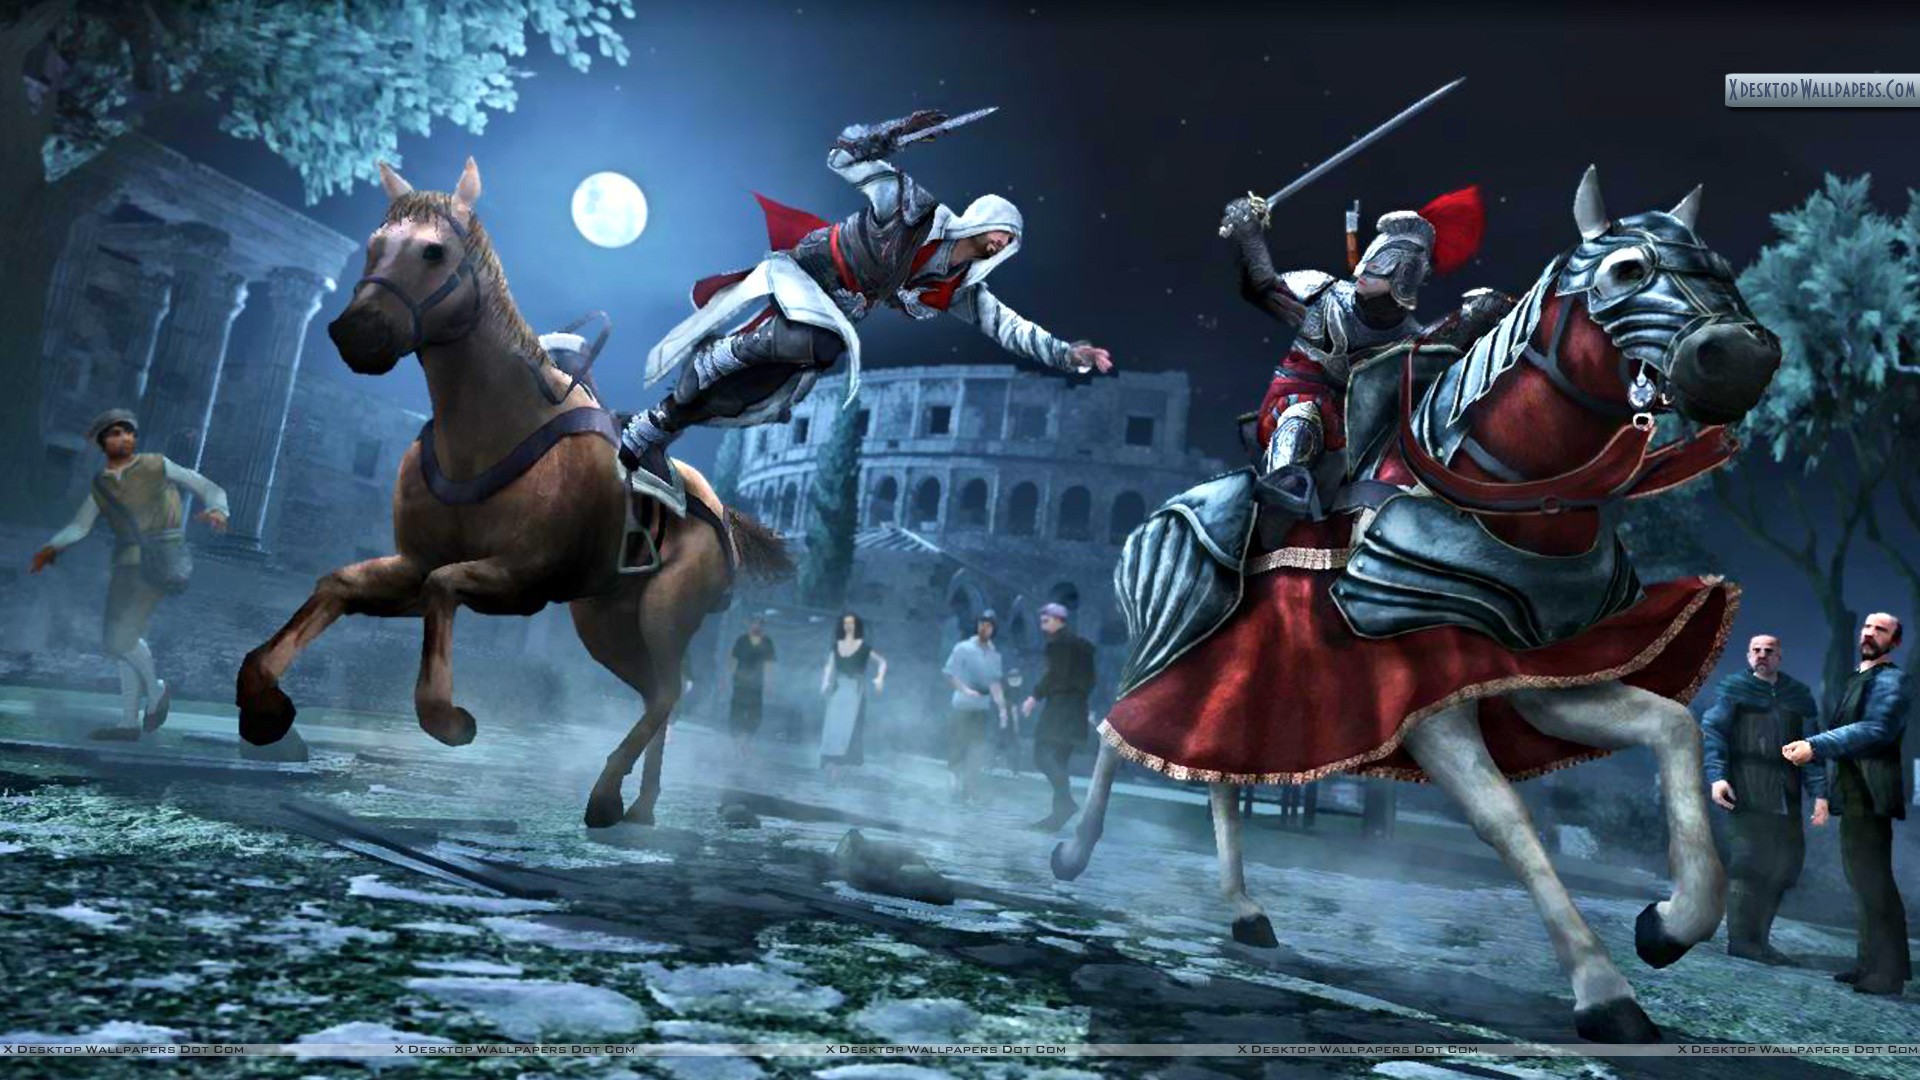 1920x1080 You are viewing wallpaper titled "Assassins Creed Brotherhood Jumping From  A Hourse" from the ...